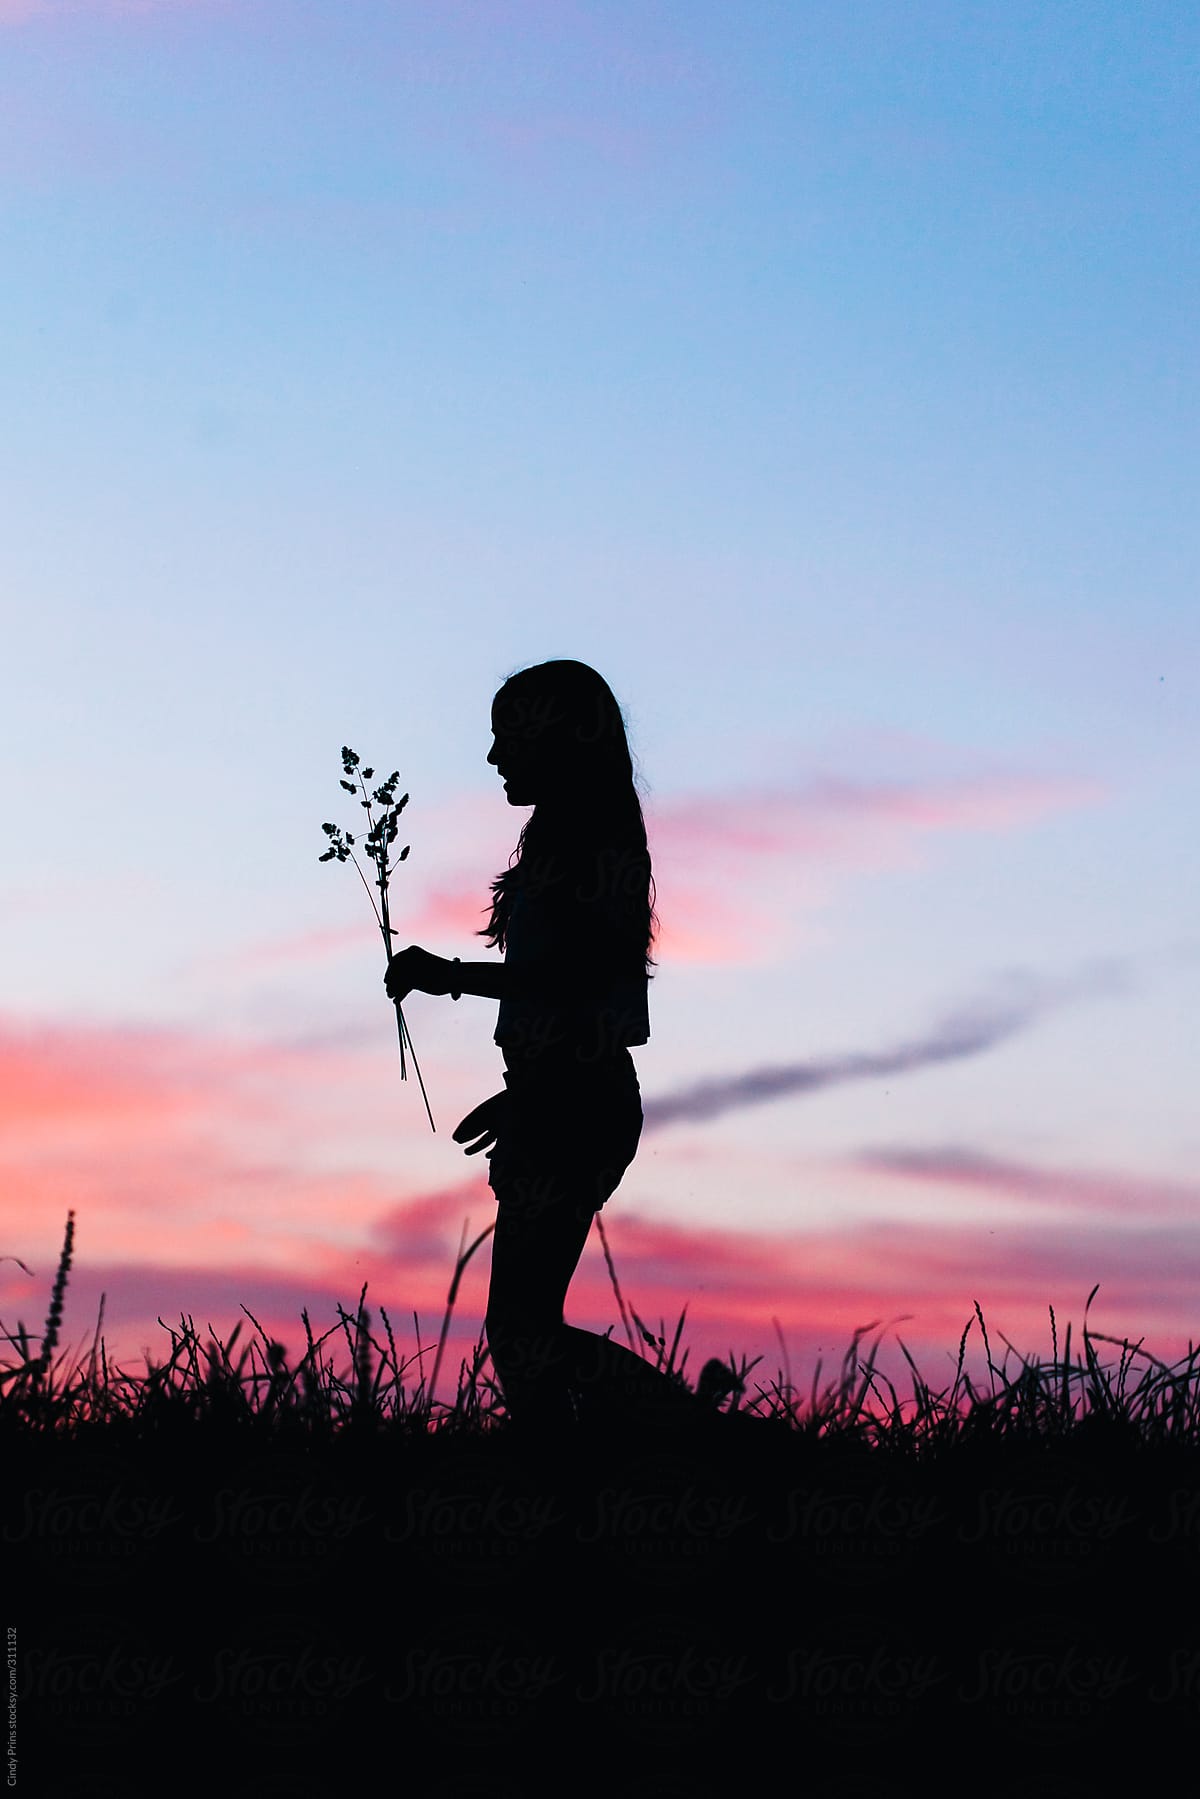 Silhouette of girl walking with flowers in her hand against a pink blue sky